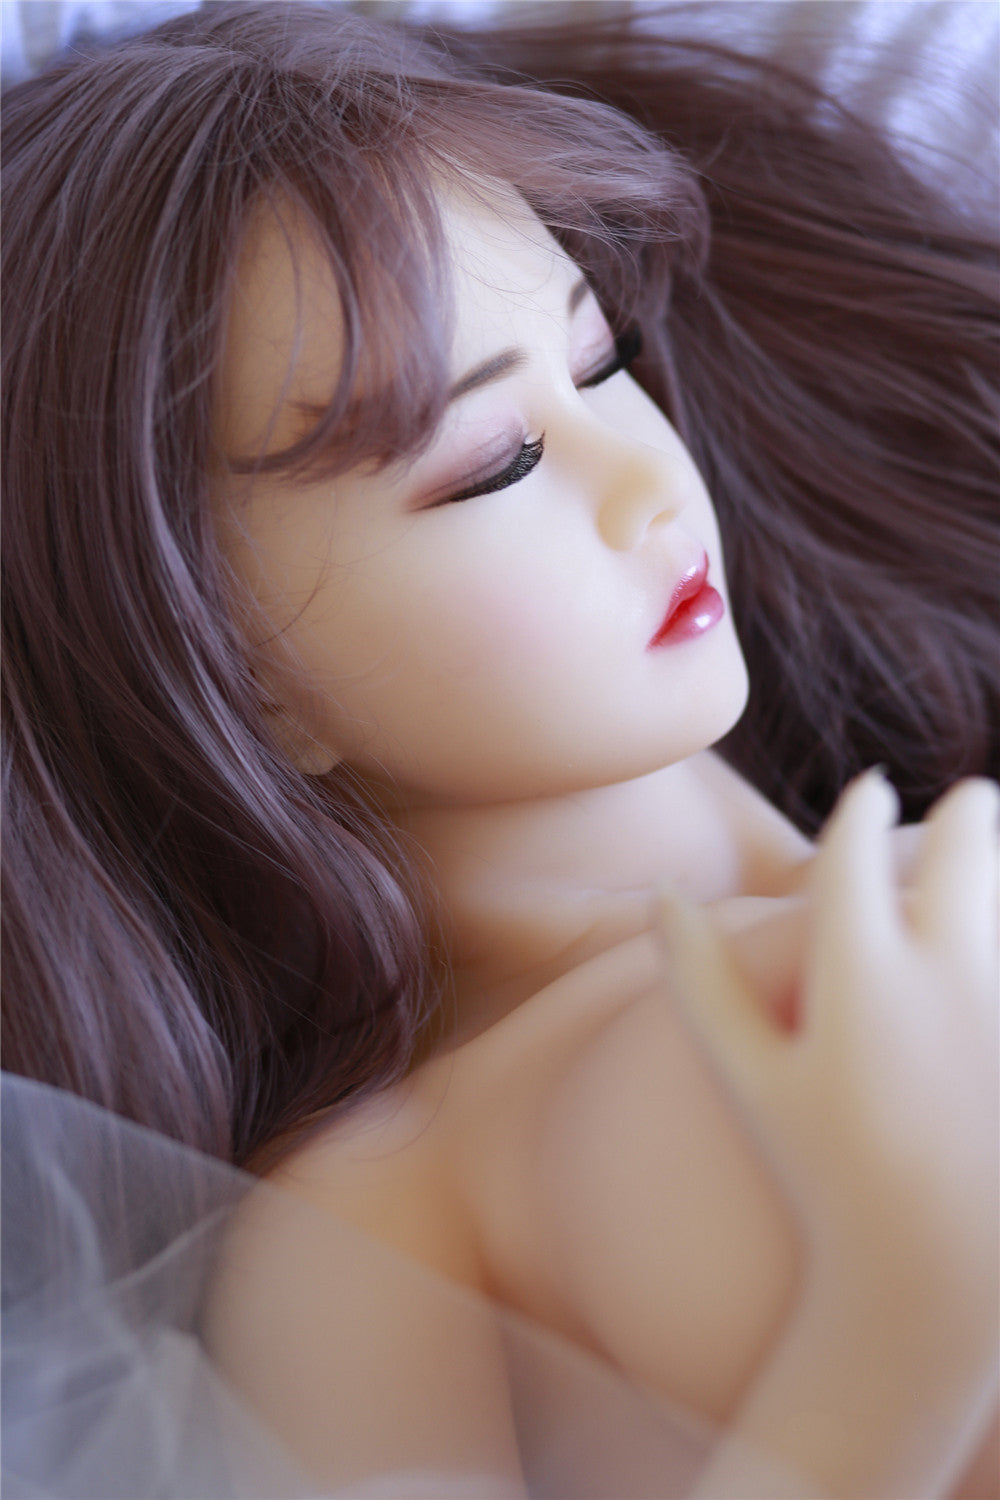 Alice Big Chess big booty sex doll with Closed Eyes - Sleeping Beauty sex robots for sale